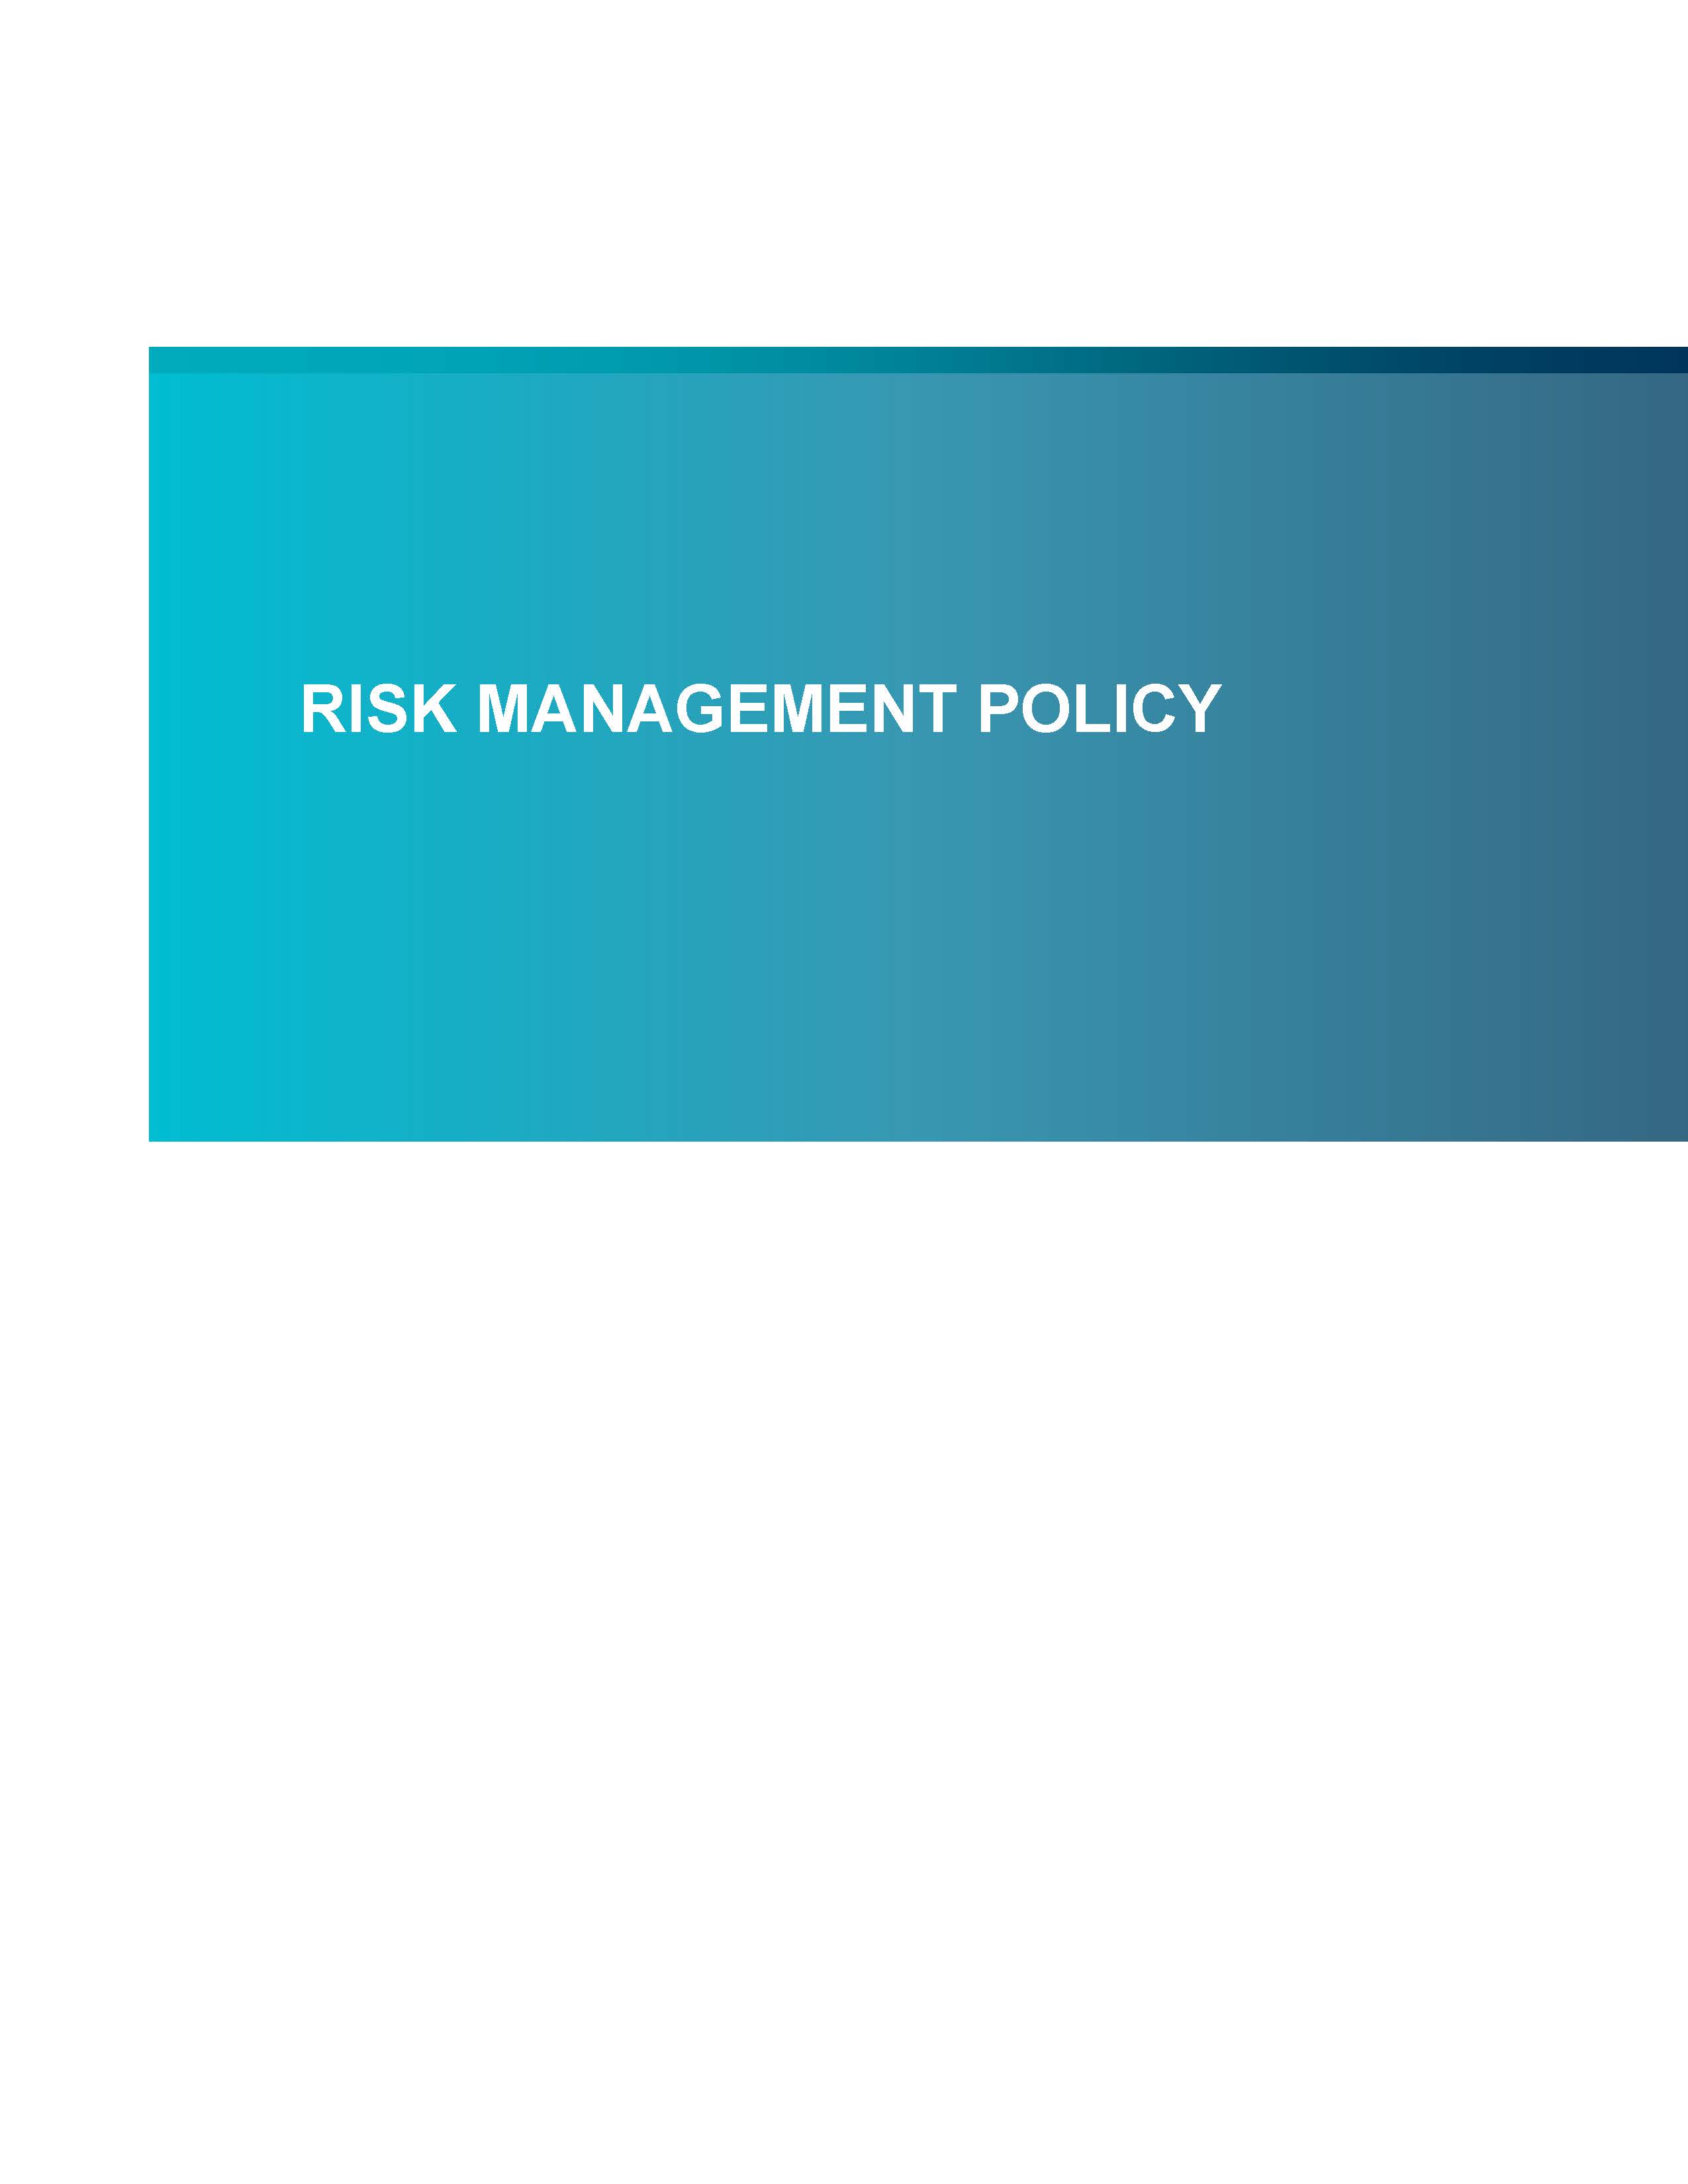 Screenshot of the first page of Risk Management Policy